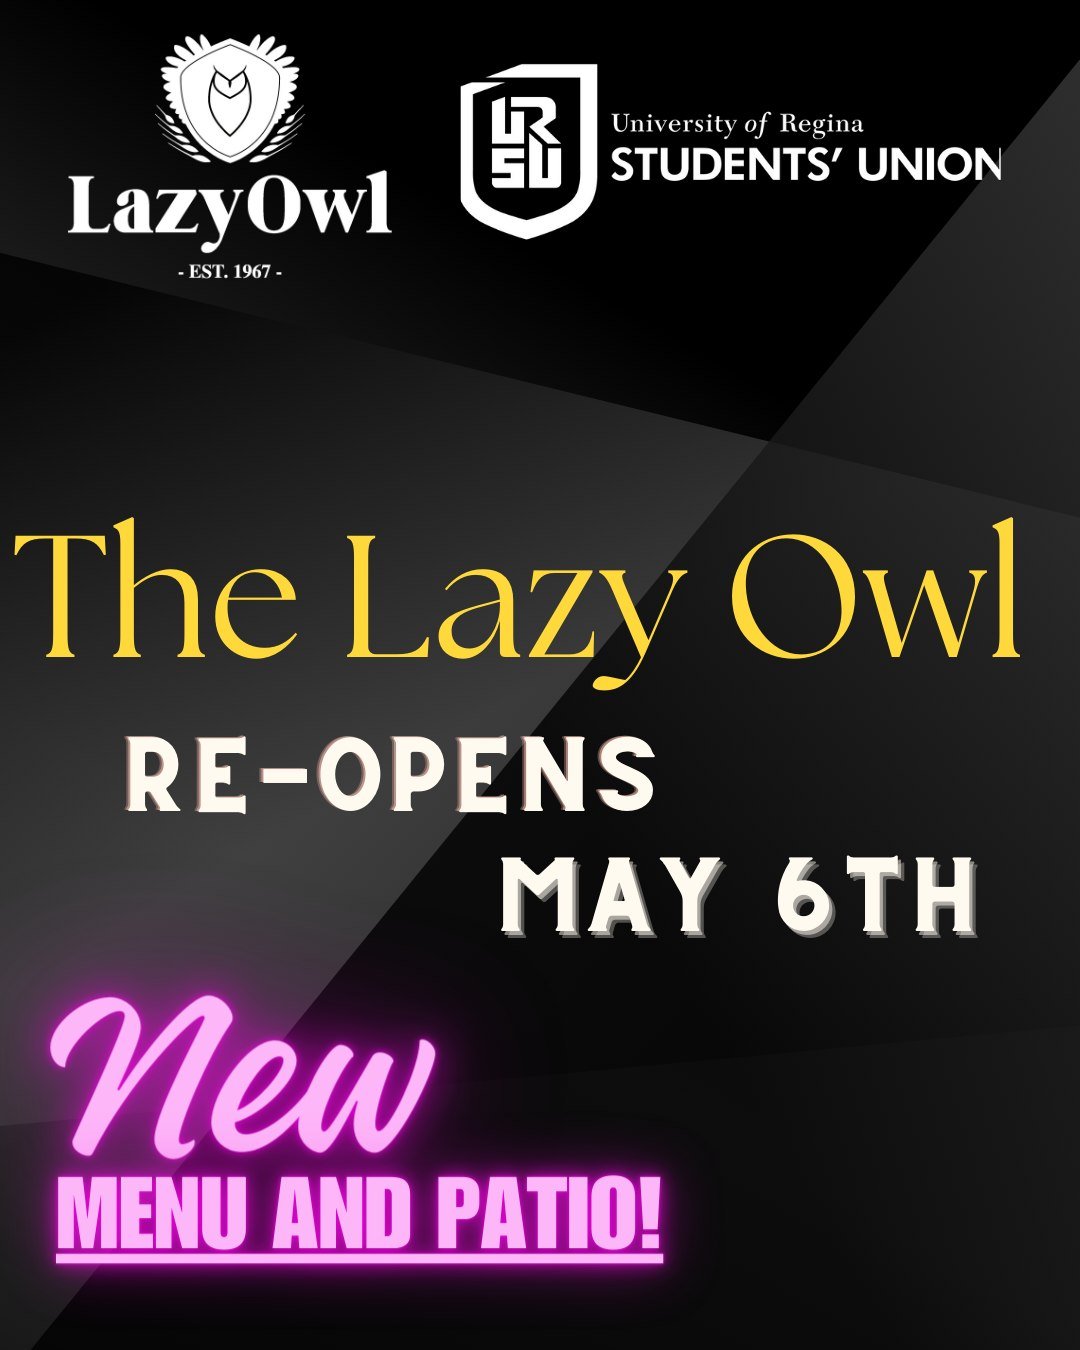 🎉 Exciting news, Owls! The Lazy Owl is reopening on May 6th with a fresh vibe just in time for the warmer days! 🌞🌳 Dive into our NEW menu, unwind on our brand-new patio with stylish furniture and lighting, and enjoy the perfect spot to soak up the